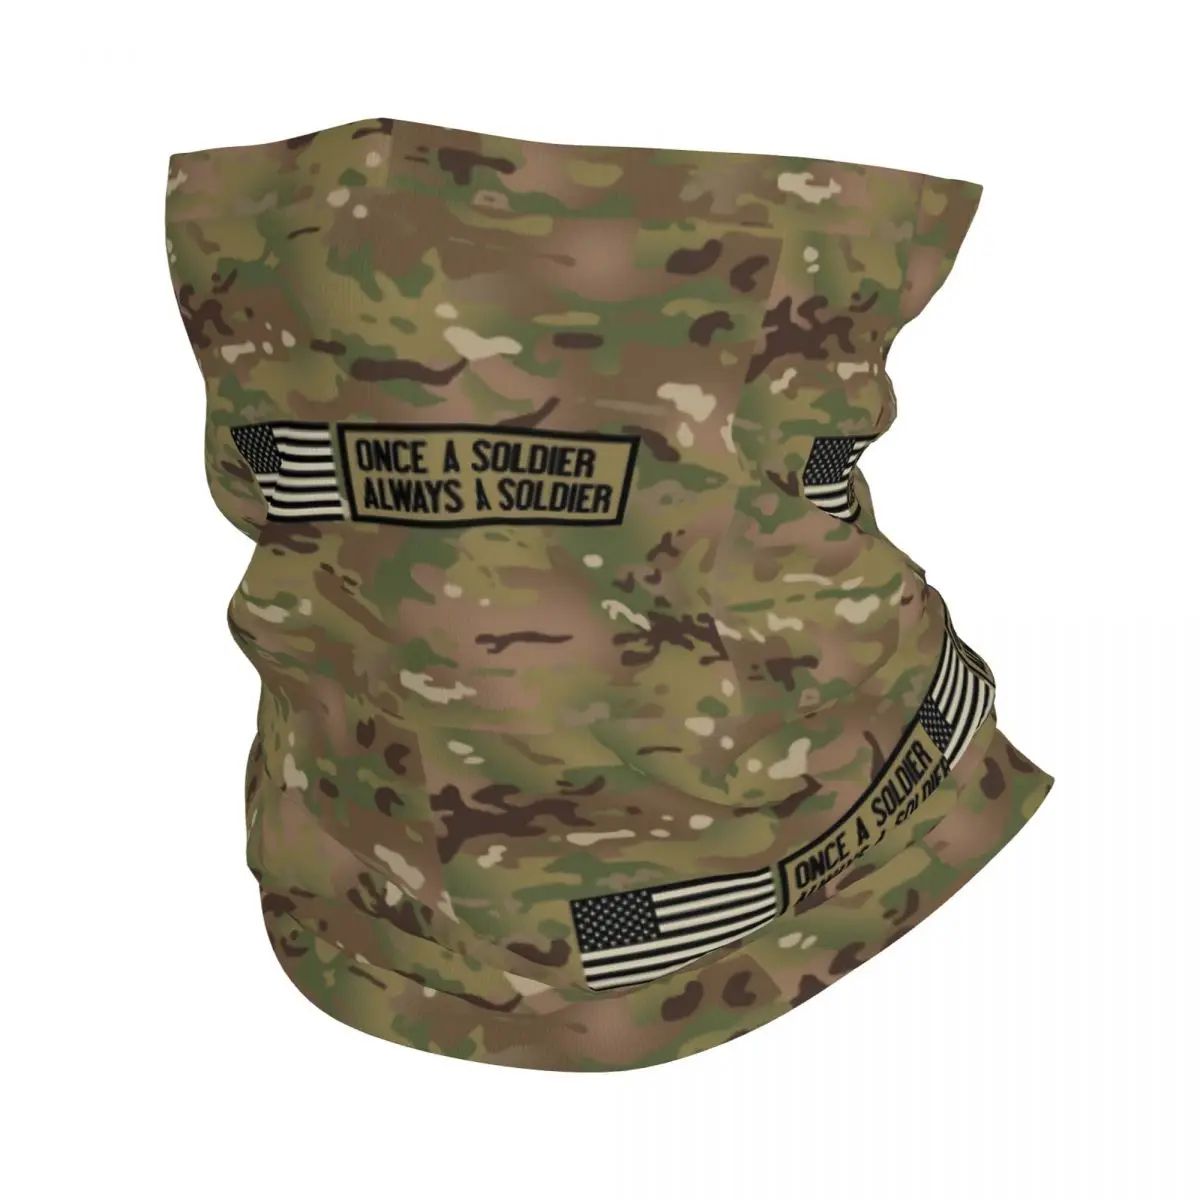 

Camouflage Once A Soldier Always A Soldier Camo Bandana Neck Cover Balaclavas Mask Scarf Cycling Sports for Men Women Windproof